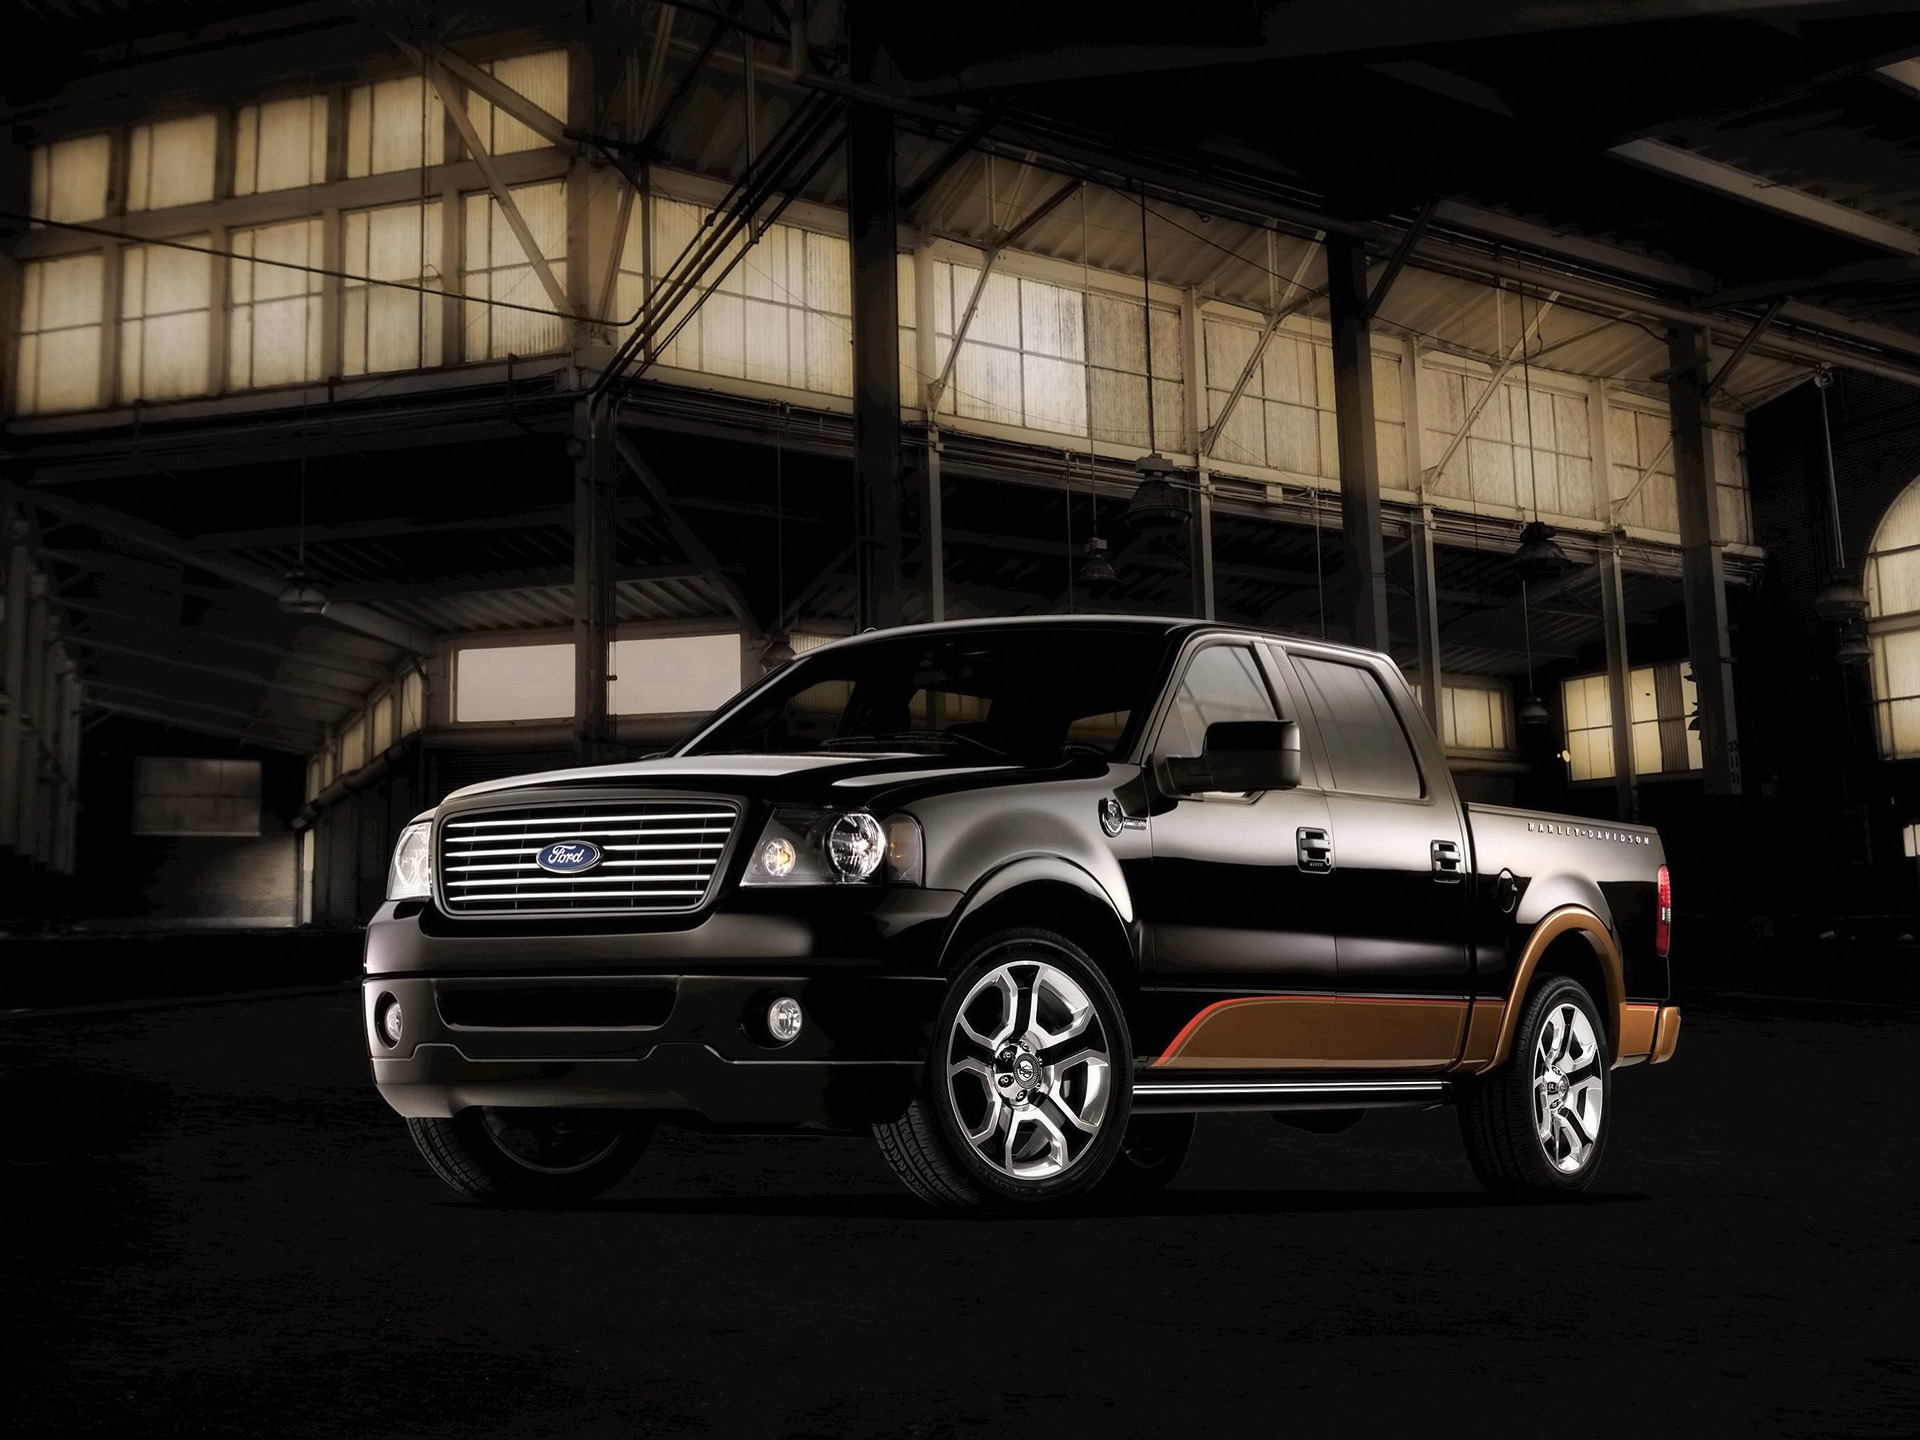 Ford F 150 Harley Davidson 2008 Wallpaper Ford Cars Wallpapers In